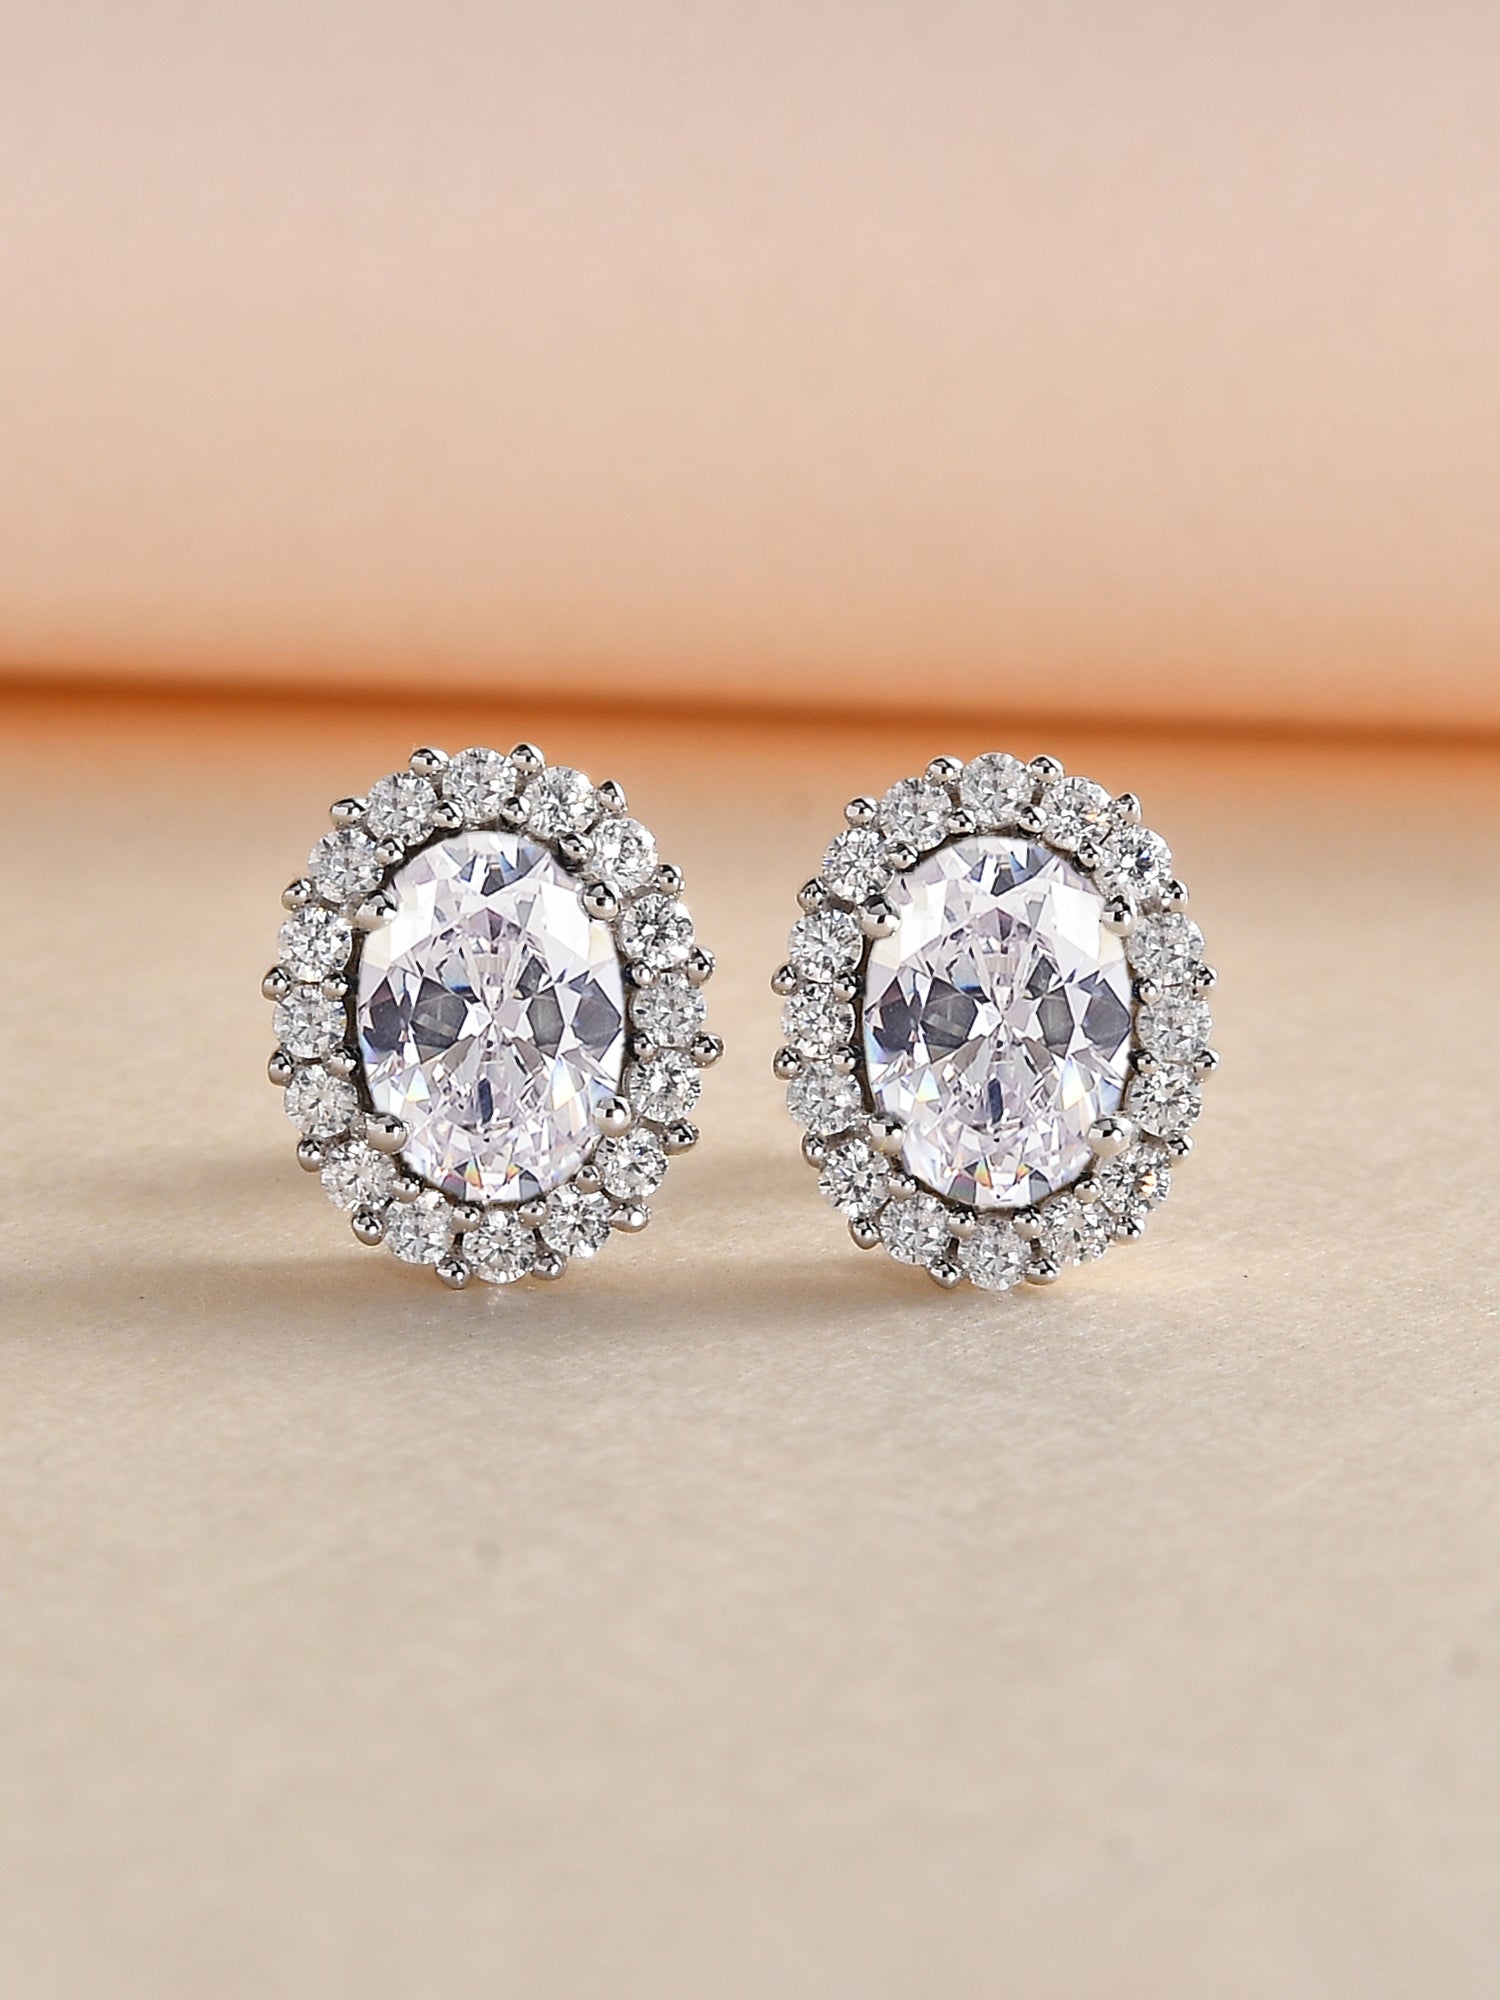 Classic 3 Carat American Diamond Earring Studs In 925 Sterling Silver